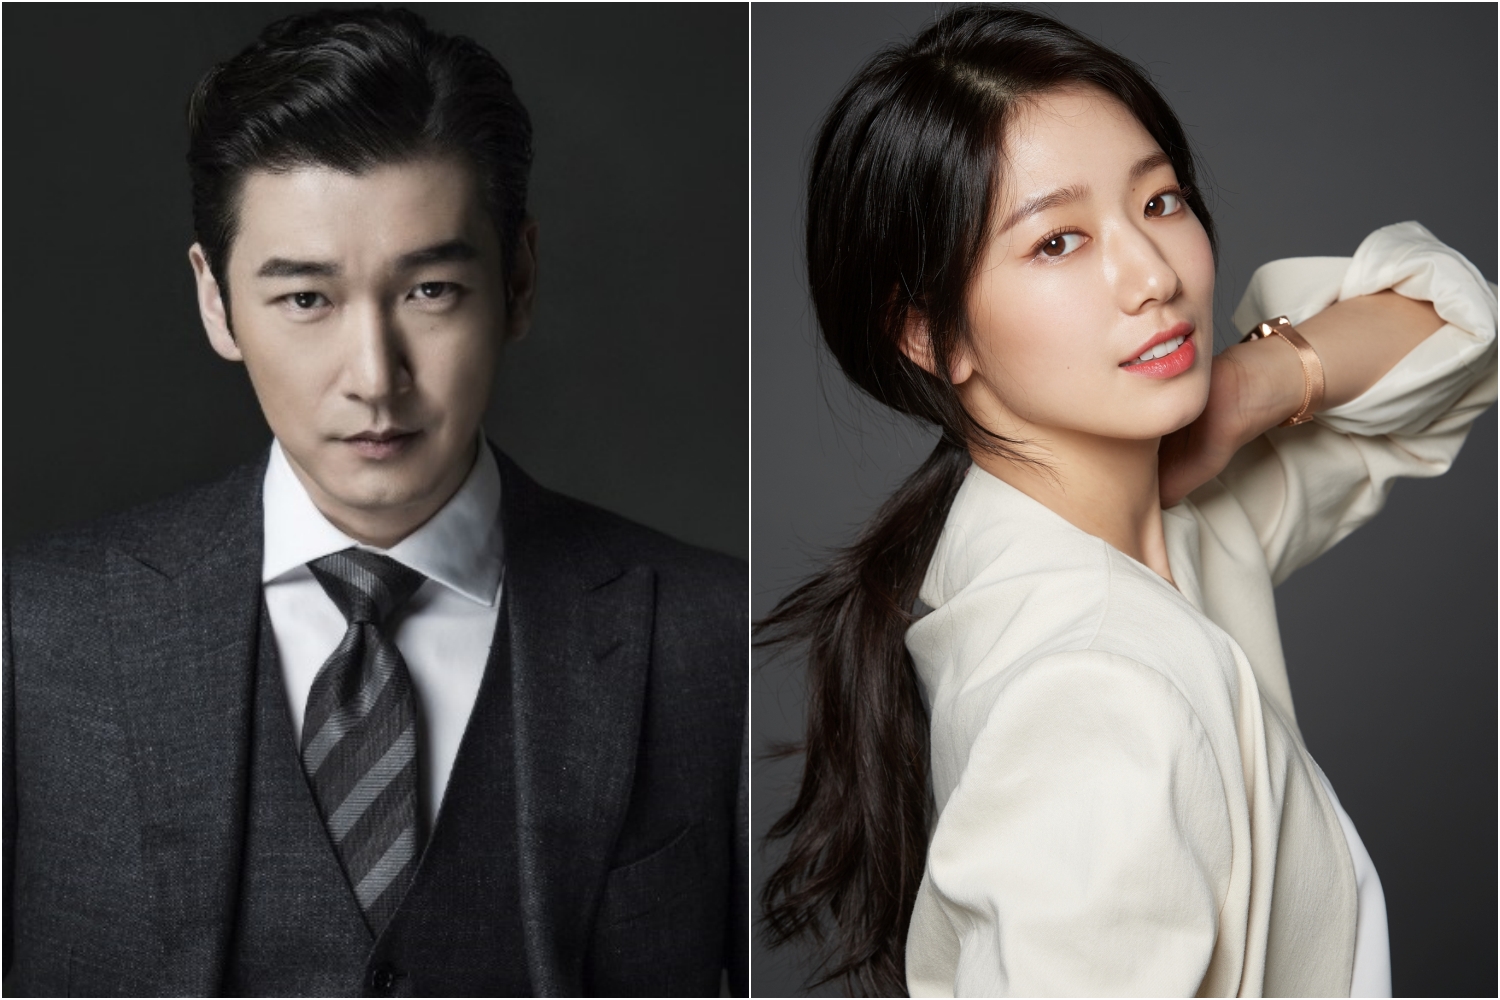 jtbc-sisyphus-the-myth-finishes-filming-to-air-in-2021-starring-jo-seung-woo-park-shin-hye